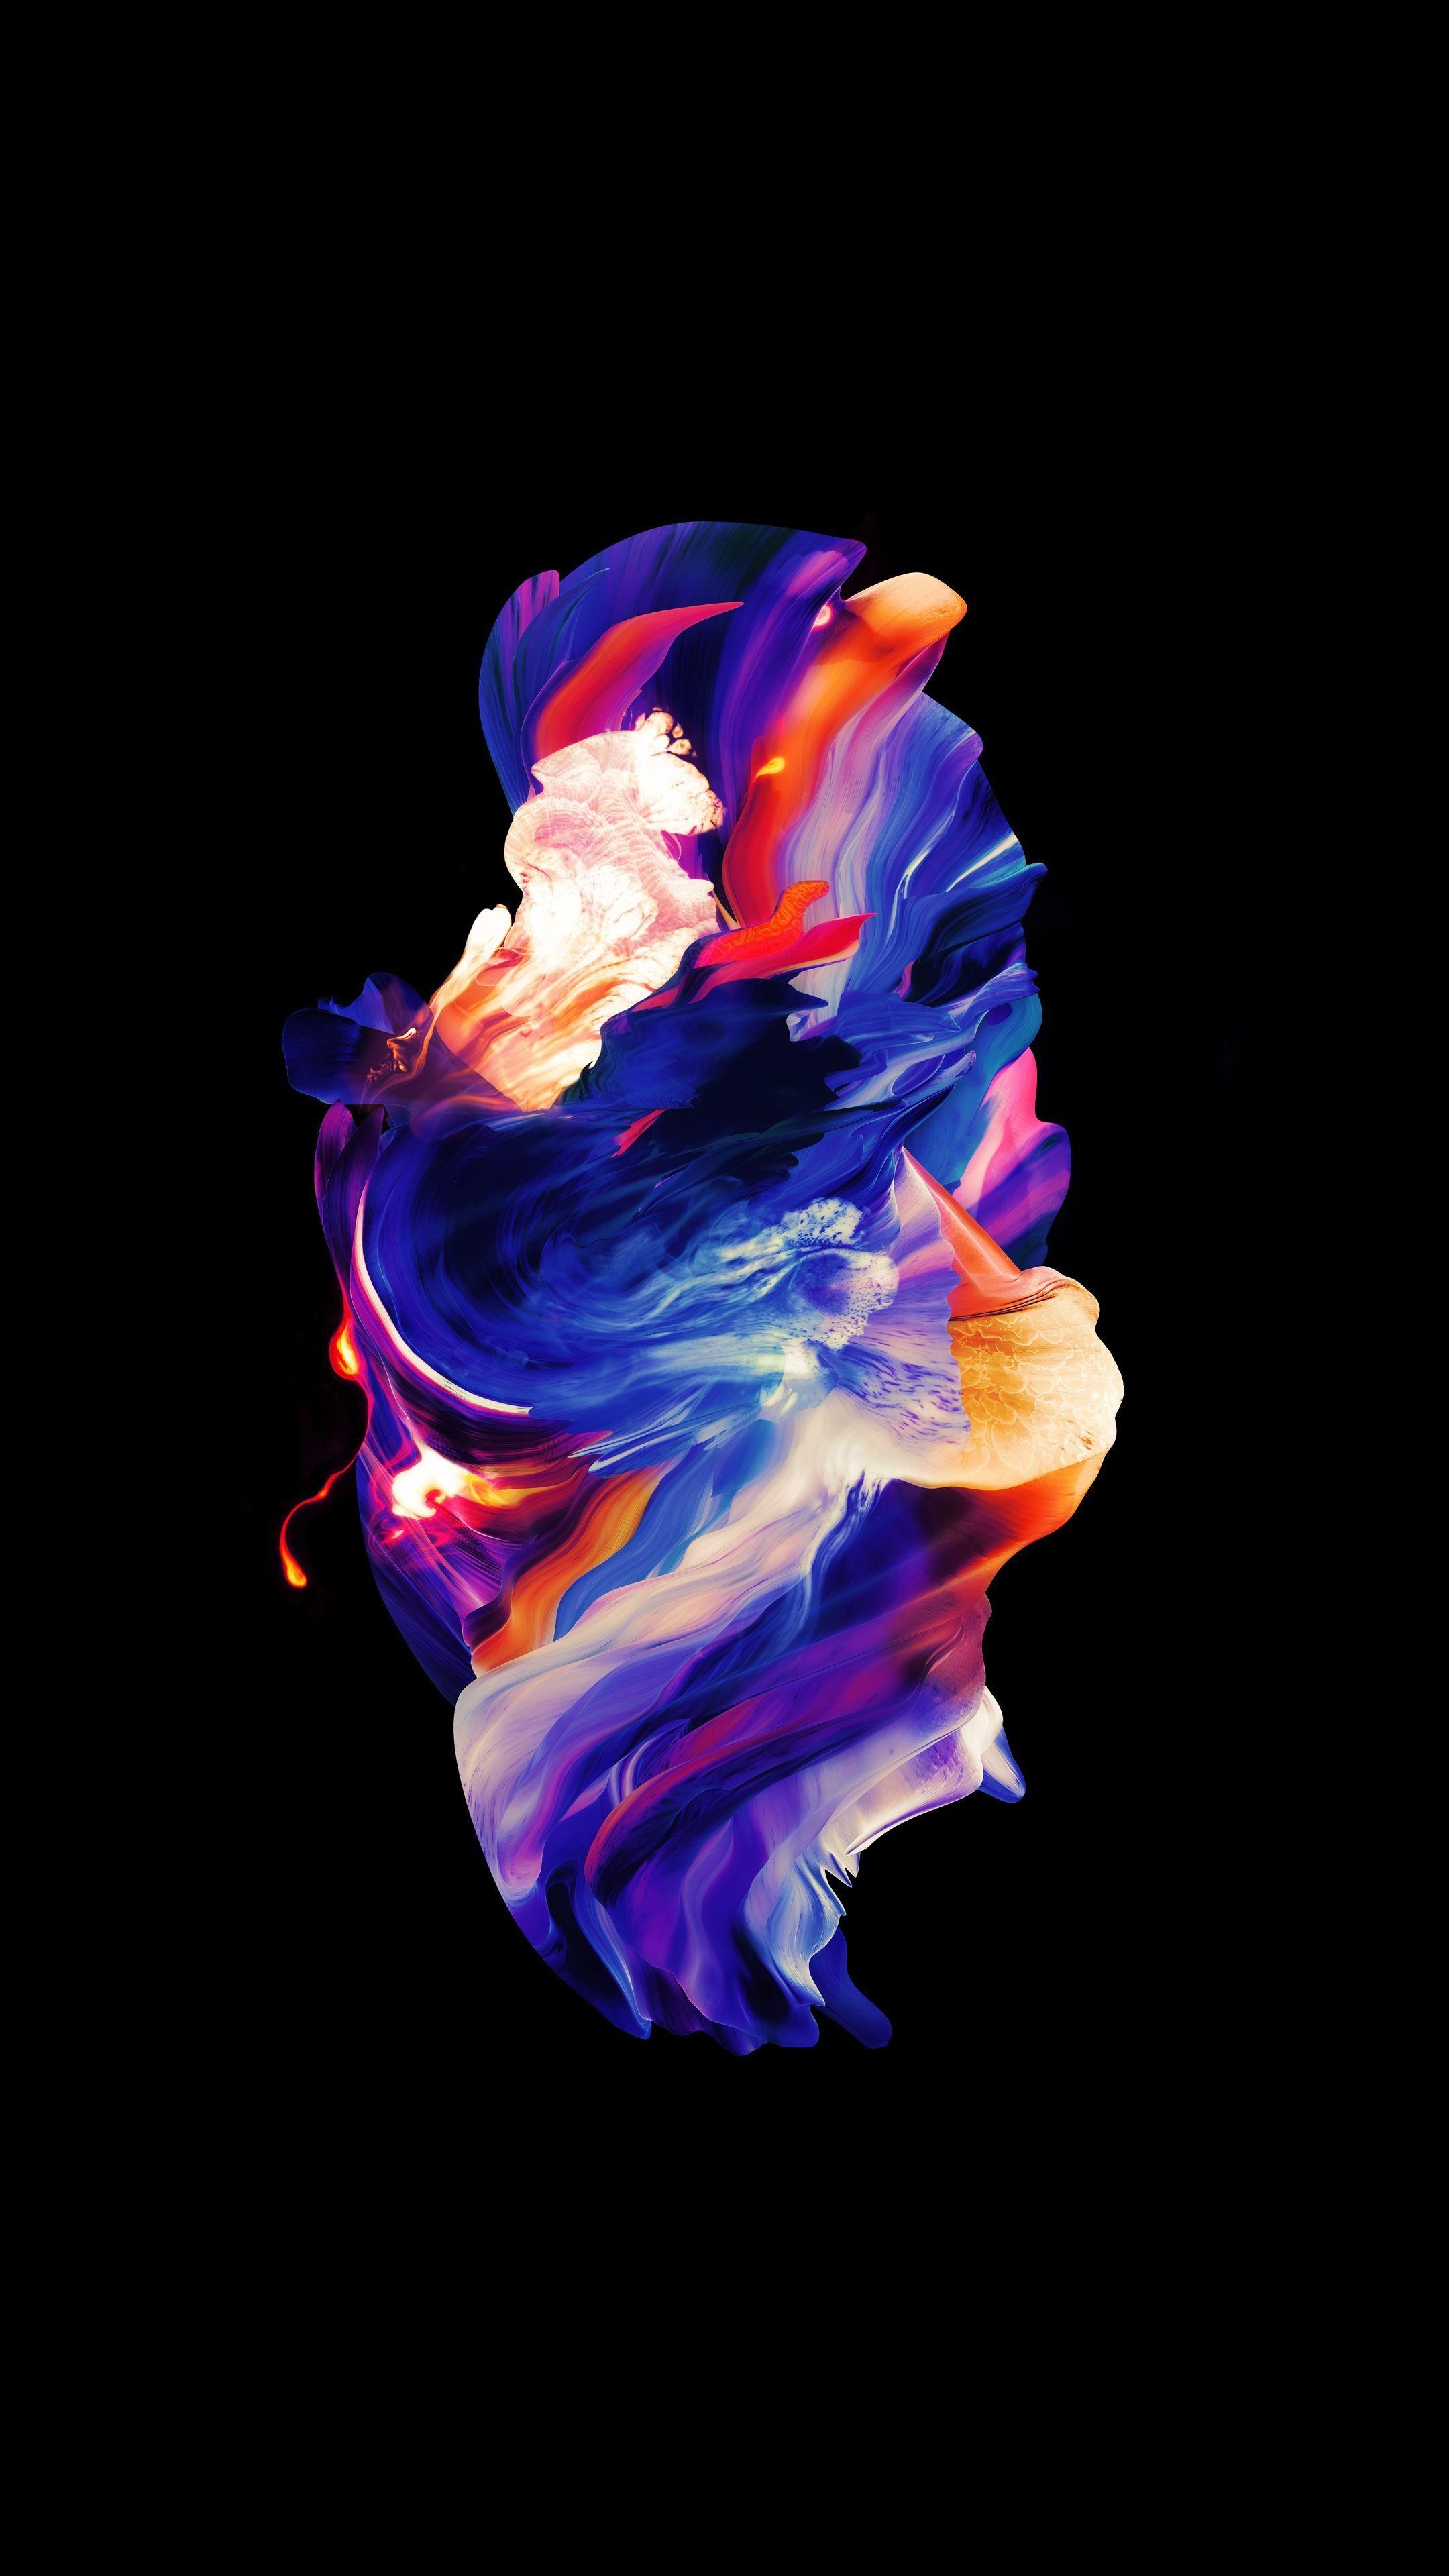 Amoled wallpapers, Stunning displays, Artistic designs, OLED technology, 2160x3840 4K Phone